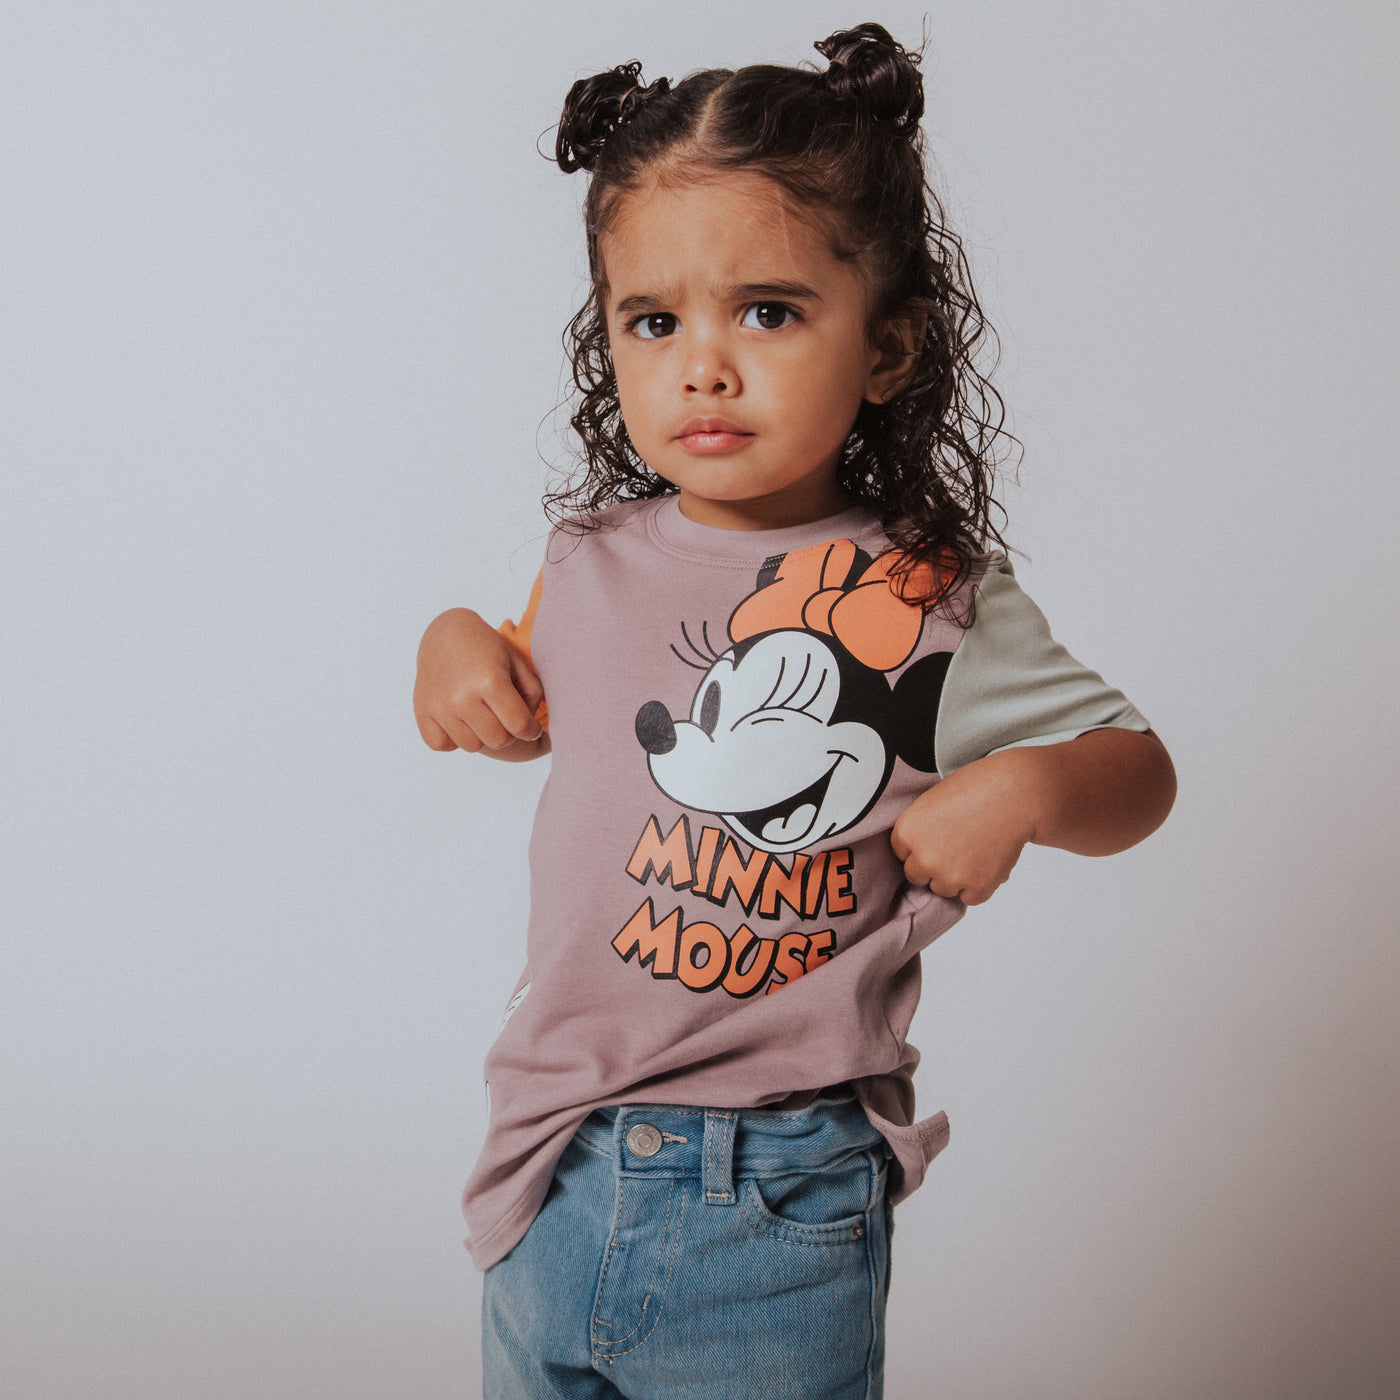 Short Sleeve Kids Tee - 'Minnie Mouse' - Disney Collection from Rags